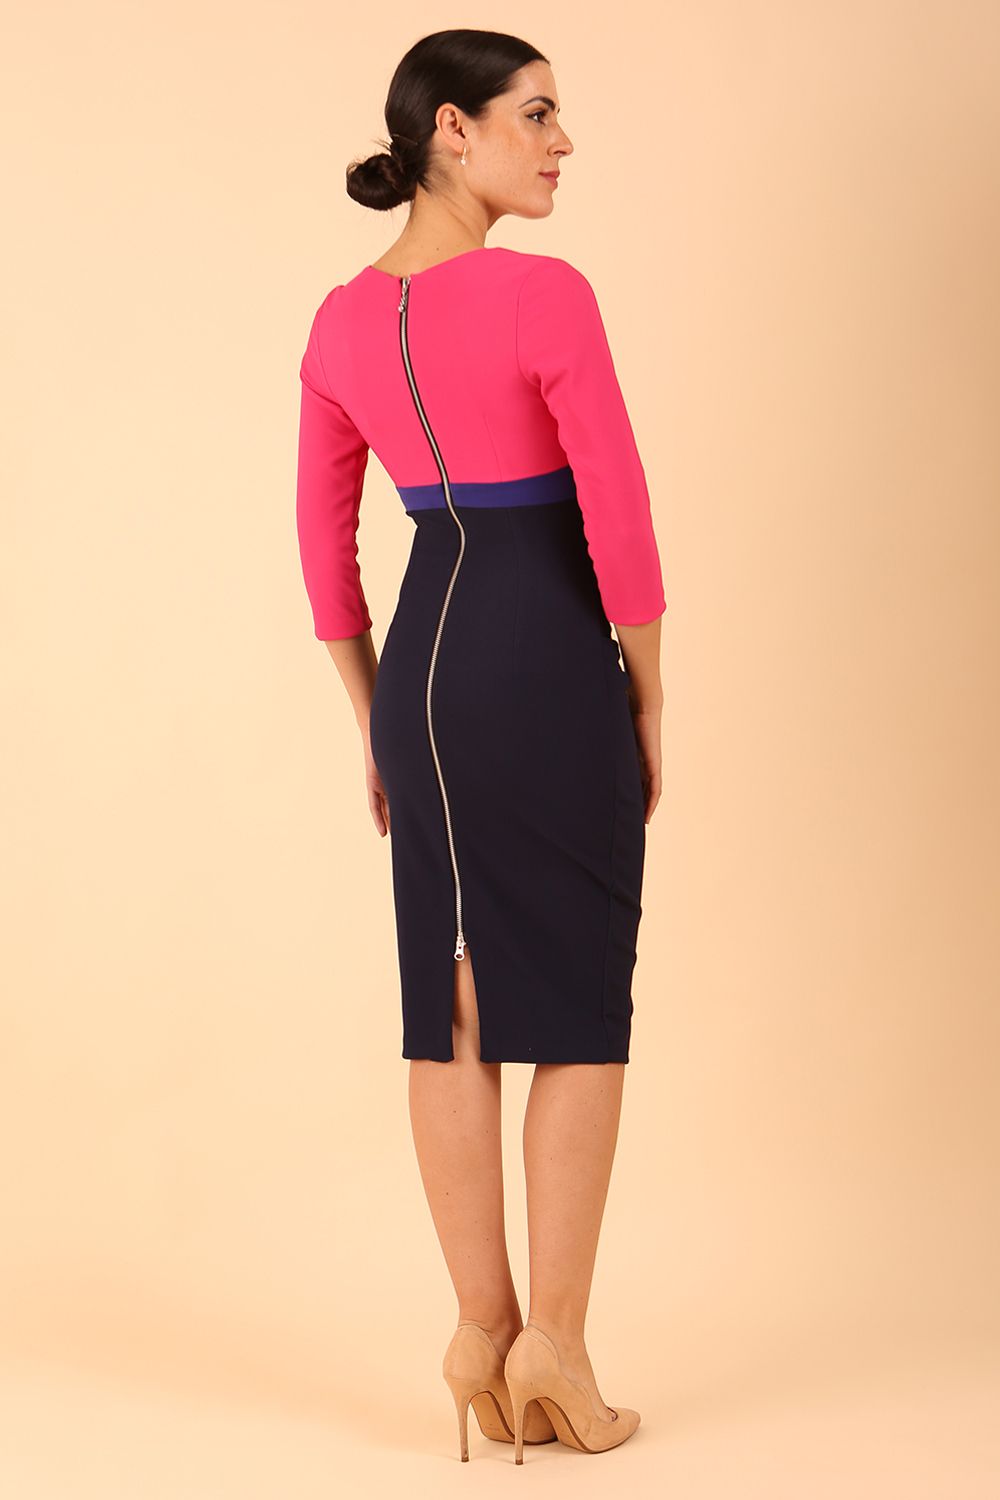 model wearing a diva catwalk Nadia 3/4 Sleeve Colour Block Dress 3/4 sleeve pencil dress exposed zip at the back in Navy blue, Fuchsia Pink and Orient Blue colour back